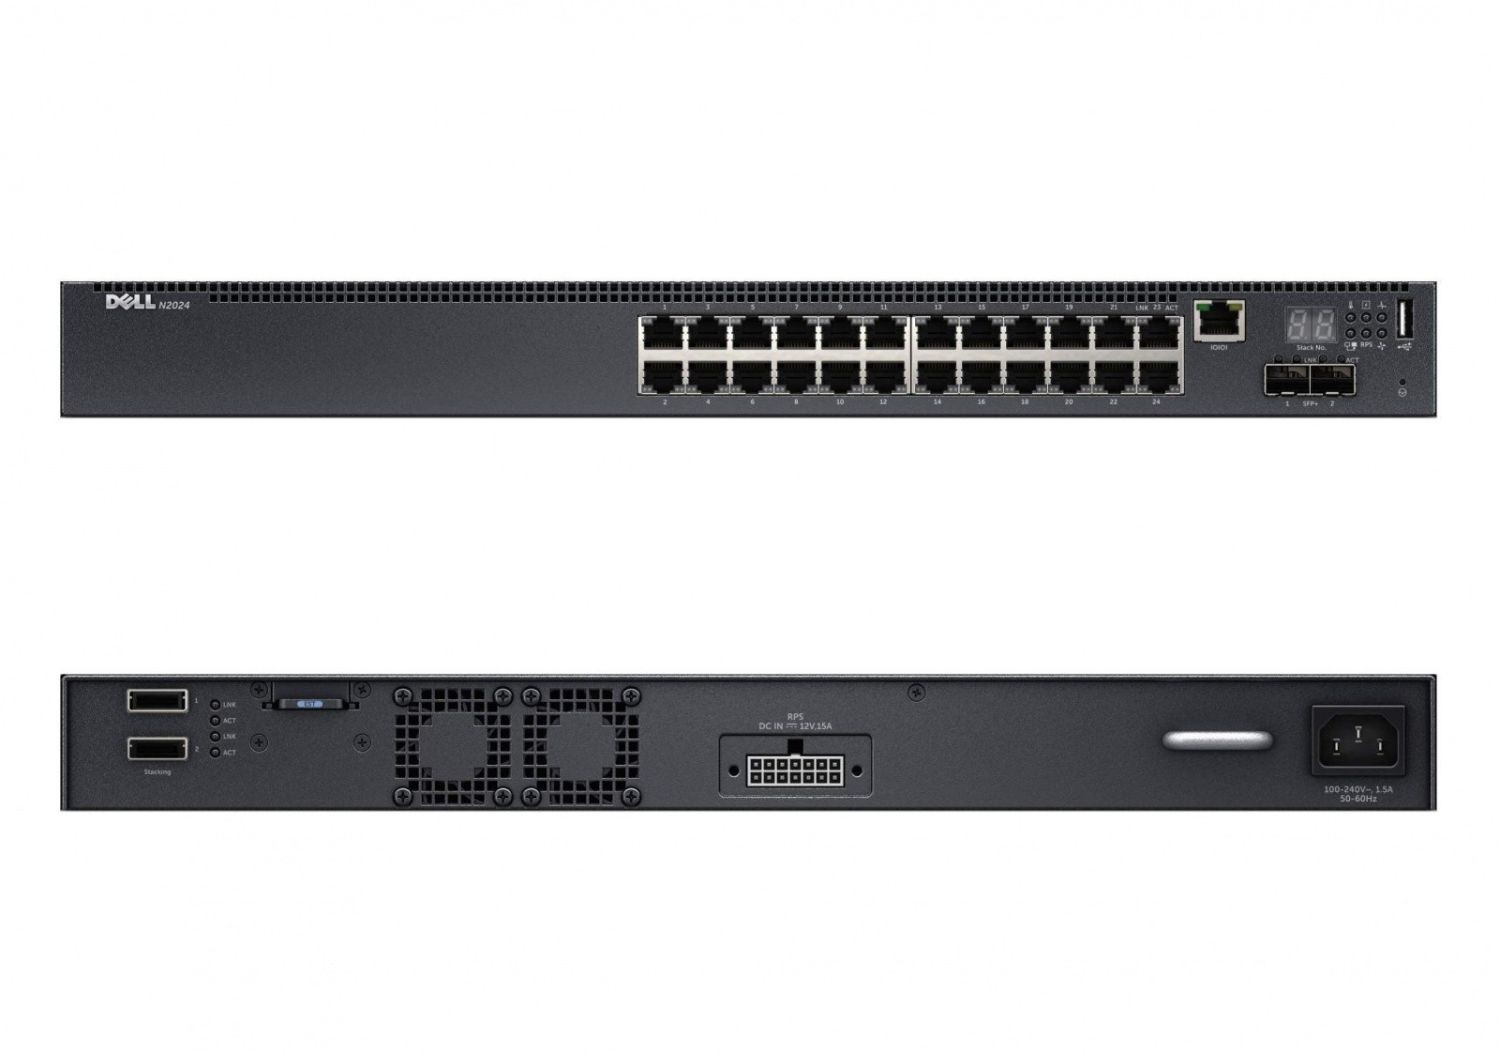 Dell Networking N2024 L2 24x 1GbE | + 2x 10GbE SFP+ fixed ports | Stacking IO to PSU airflow AC